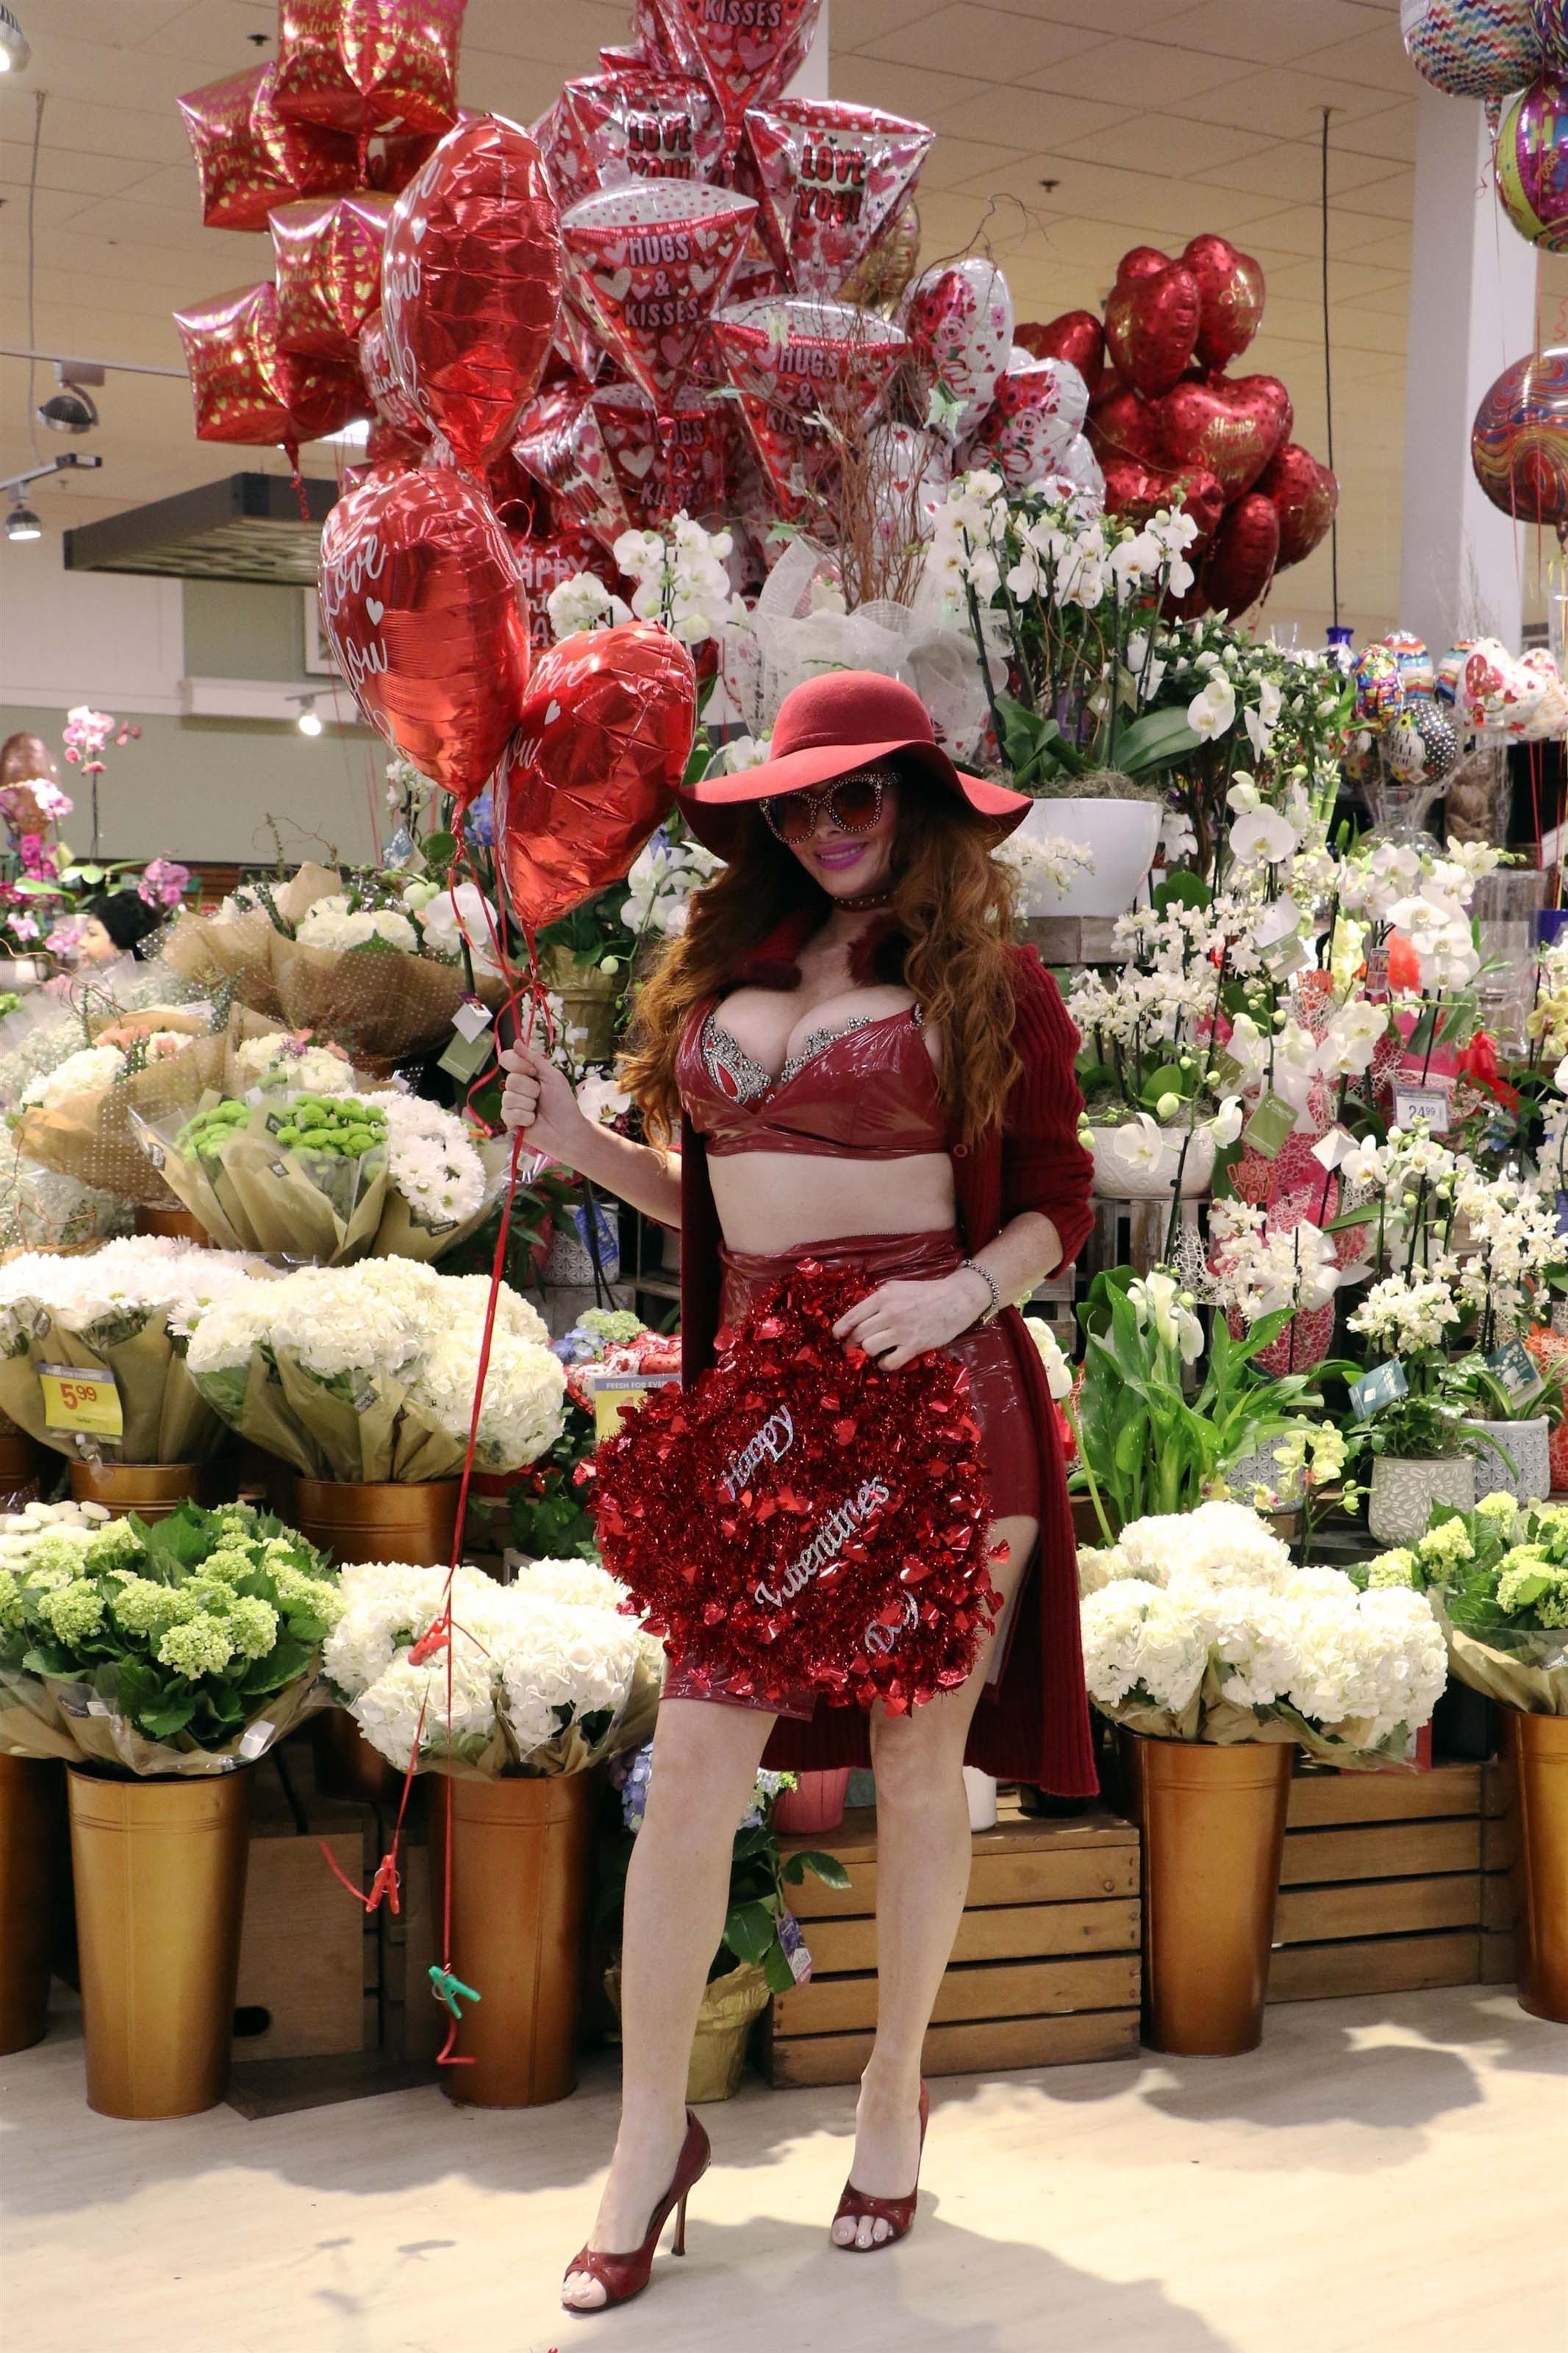 Phoebe Price displays her Valentine’s Day outfit shopping